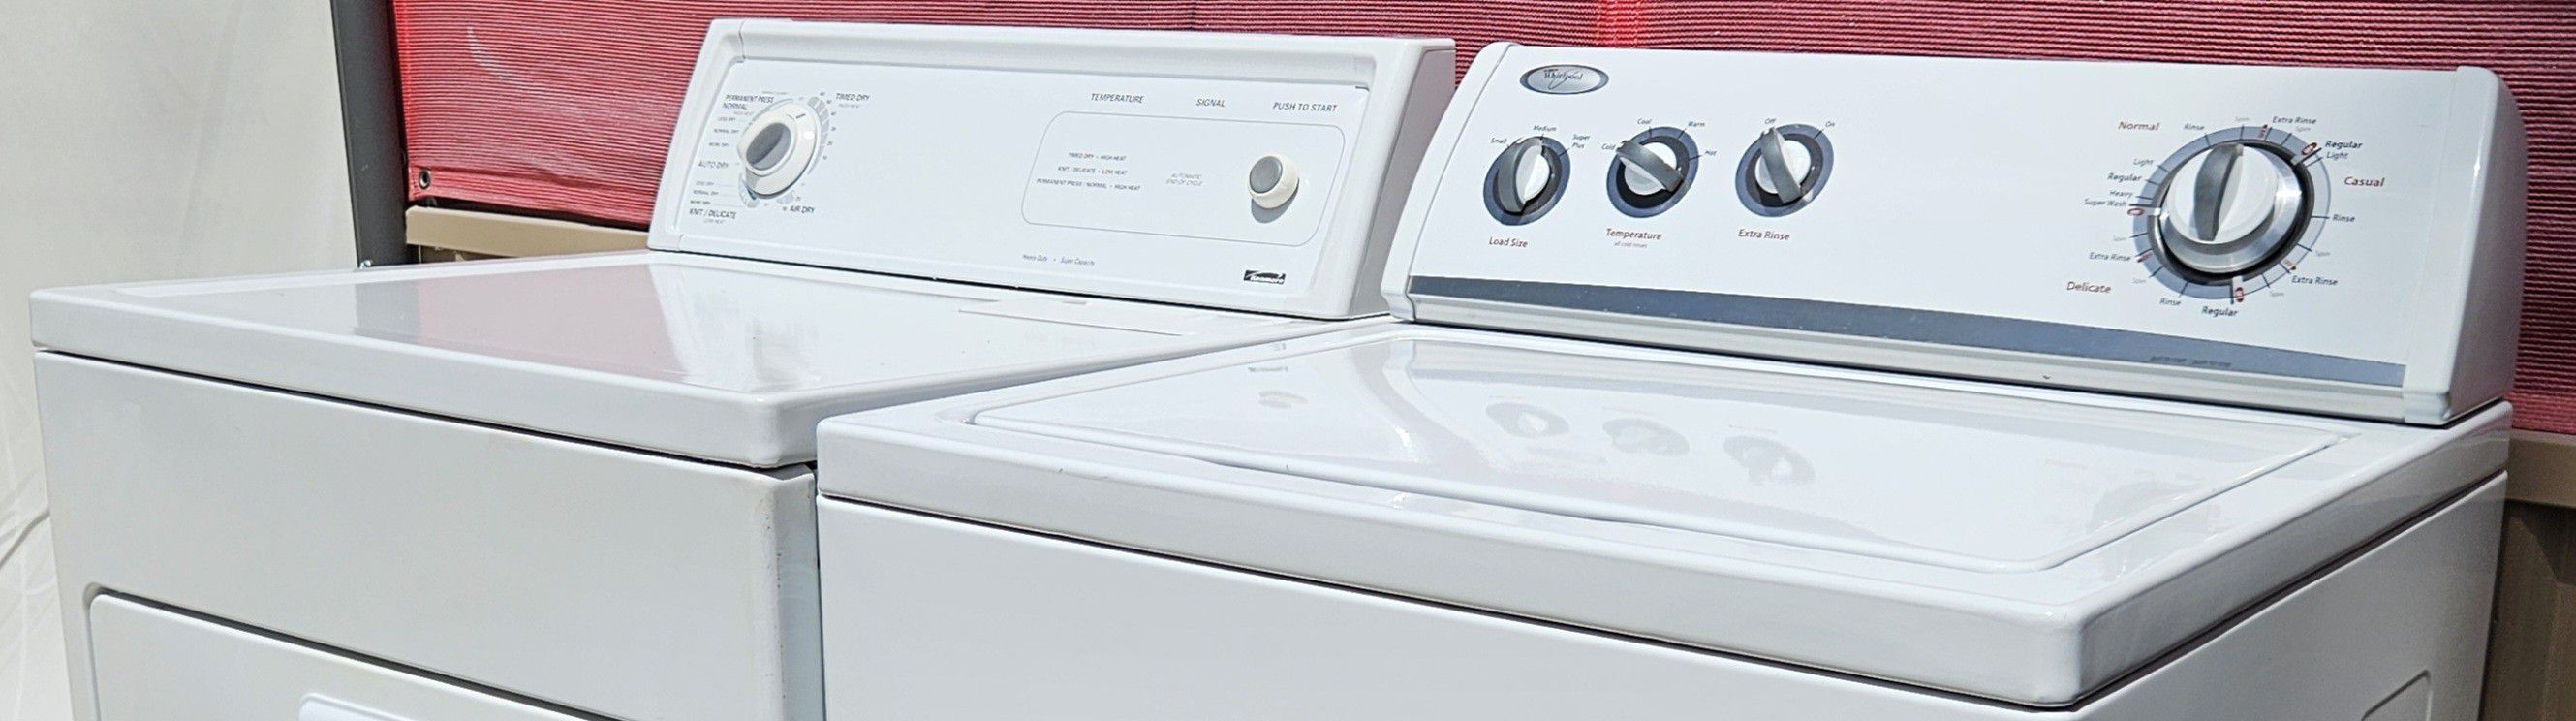 Super reliable Set 🔆 🇺🇸 Whirlpool Washer and Kenmore Dryer 🇺🇸🔆 